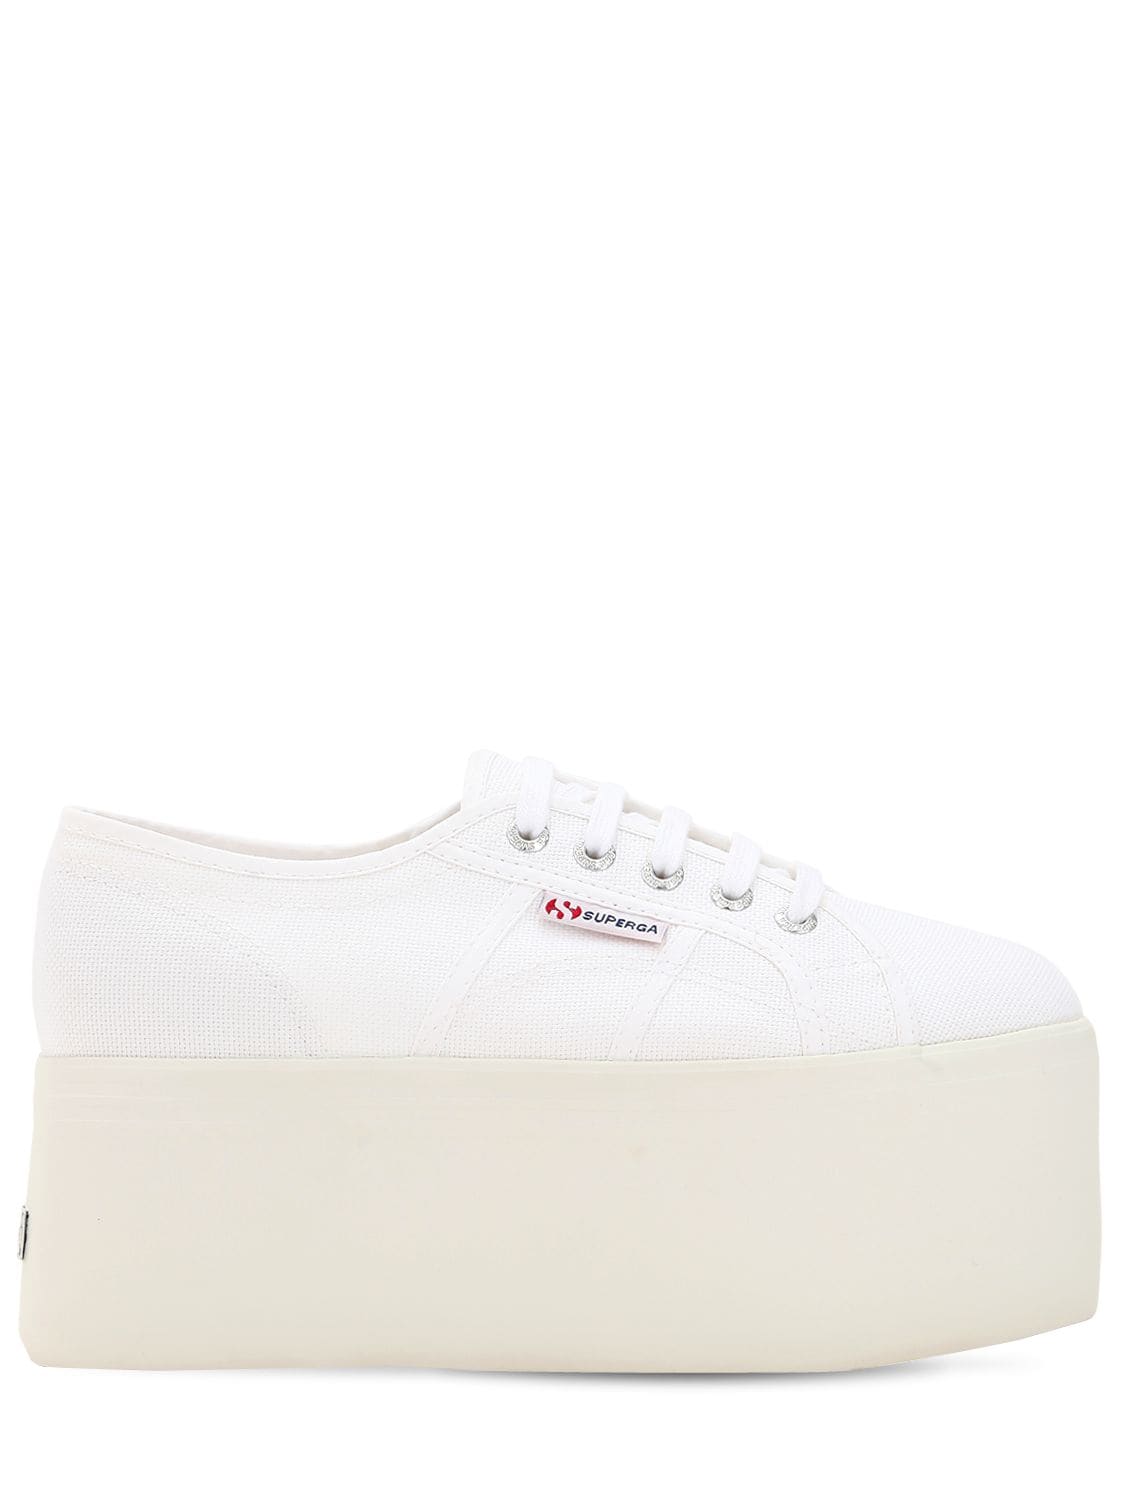 Superga 70mm Canvas Platform Sneakers In White